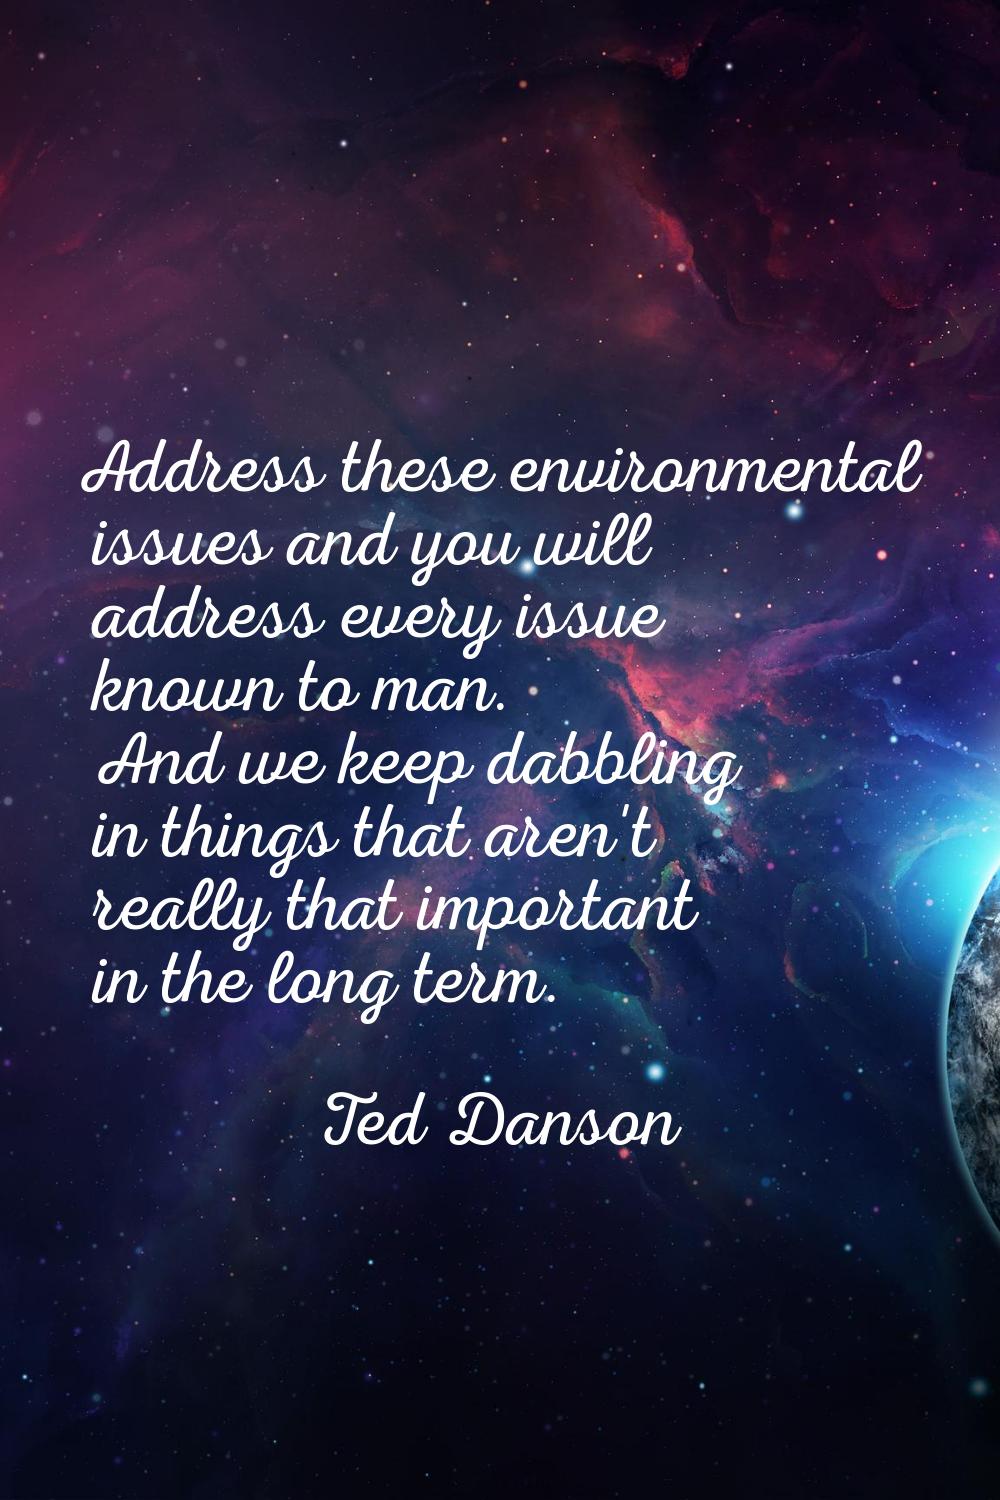 Address these environmental issues and you will address every issue known to man. And we keep dabbl